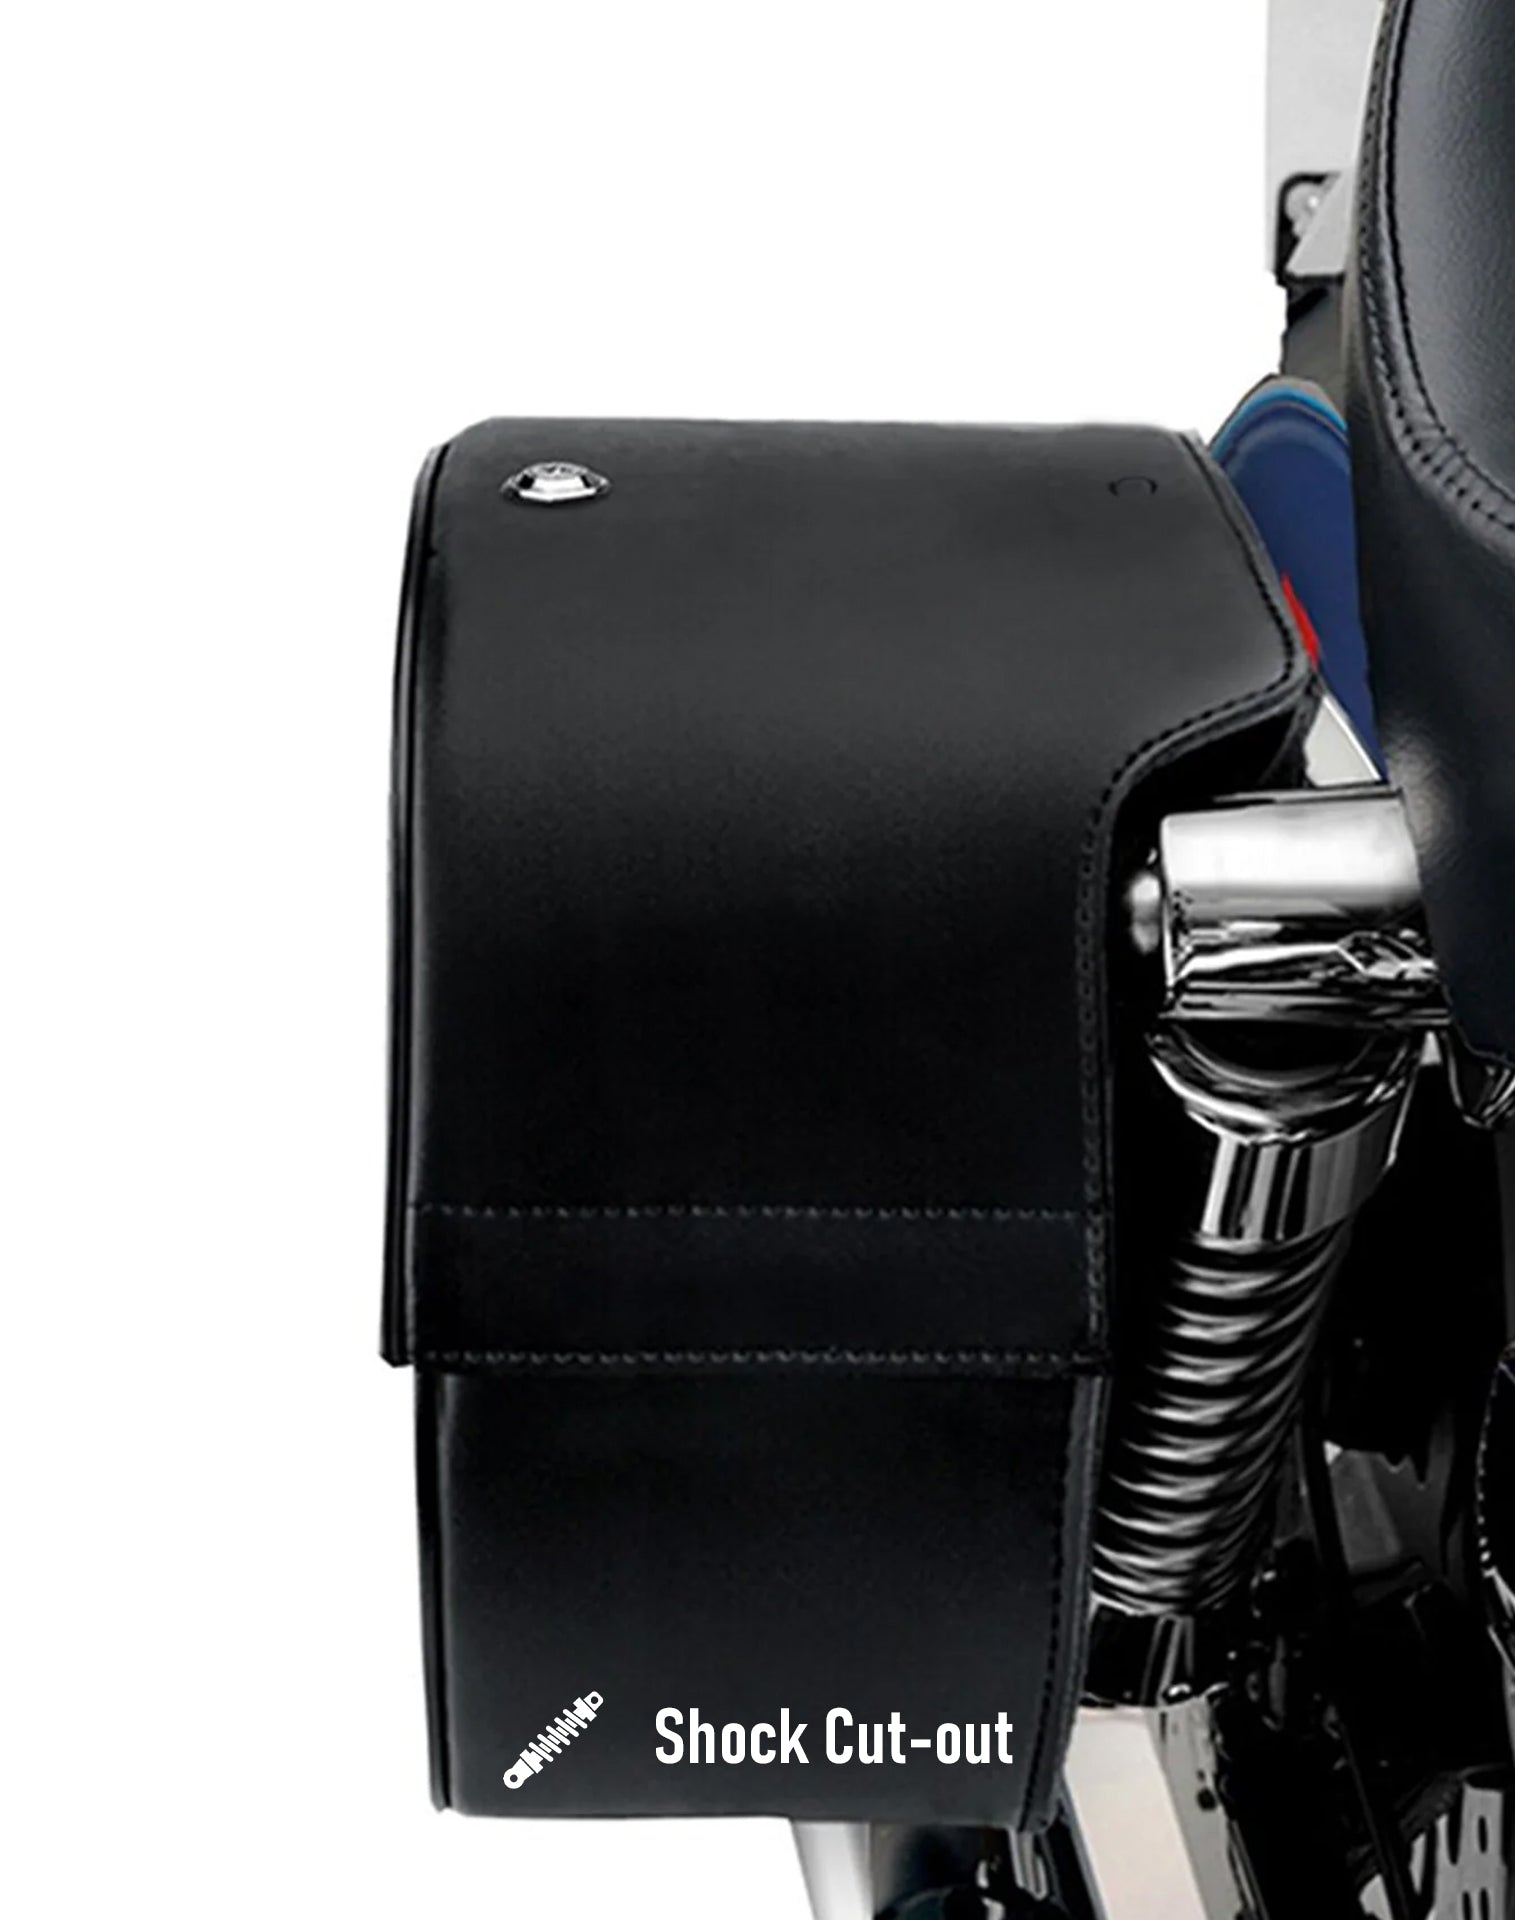 26L - Pantheon Large Shock Cutout Leather Saddlebags for Harley Sportster 1200 Custom XL1200C/XLH1200C